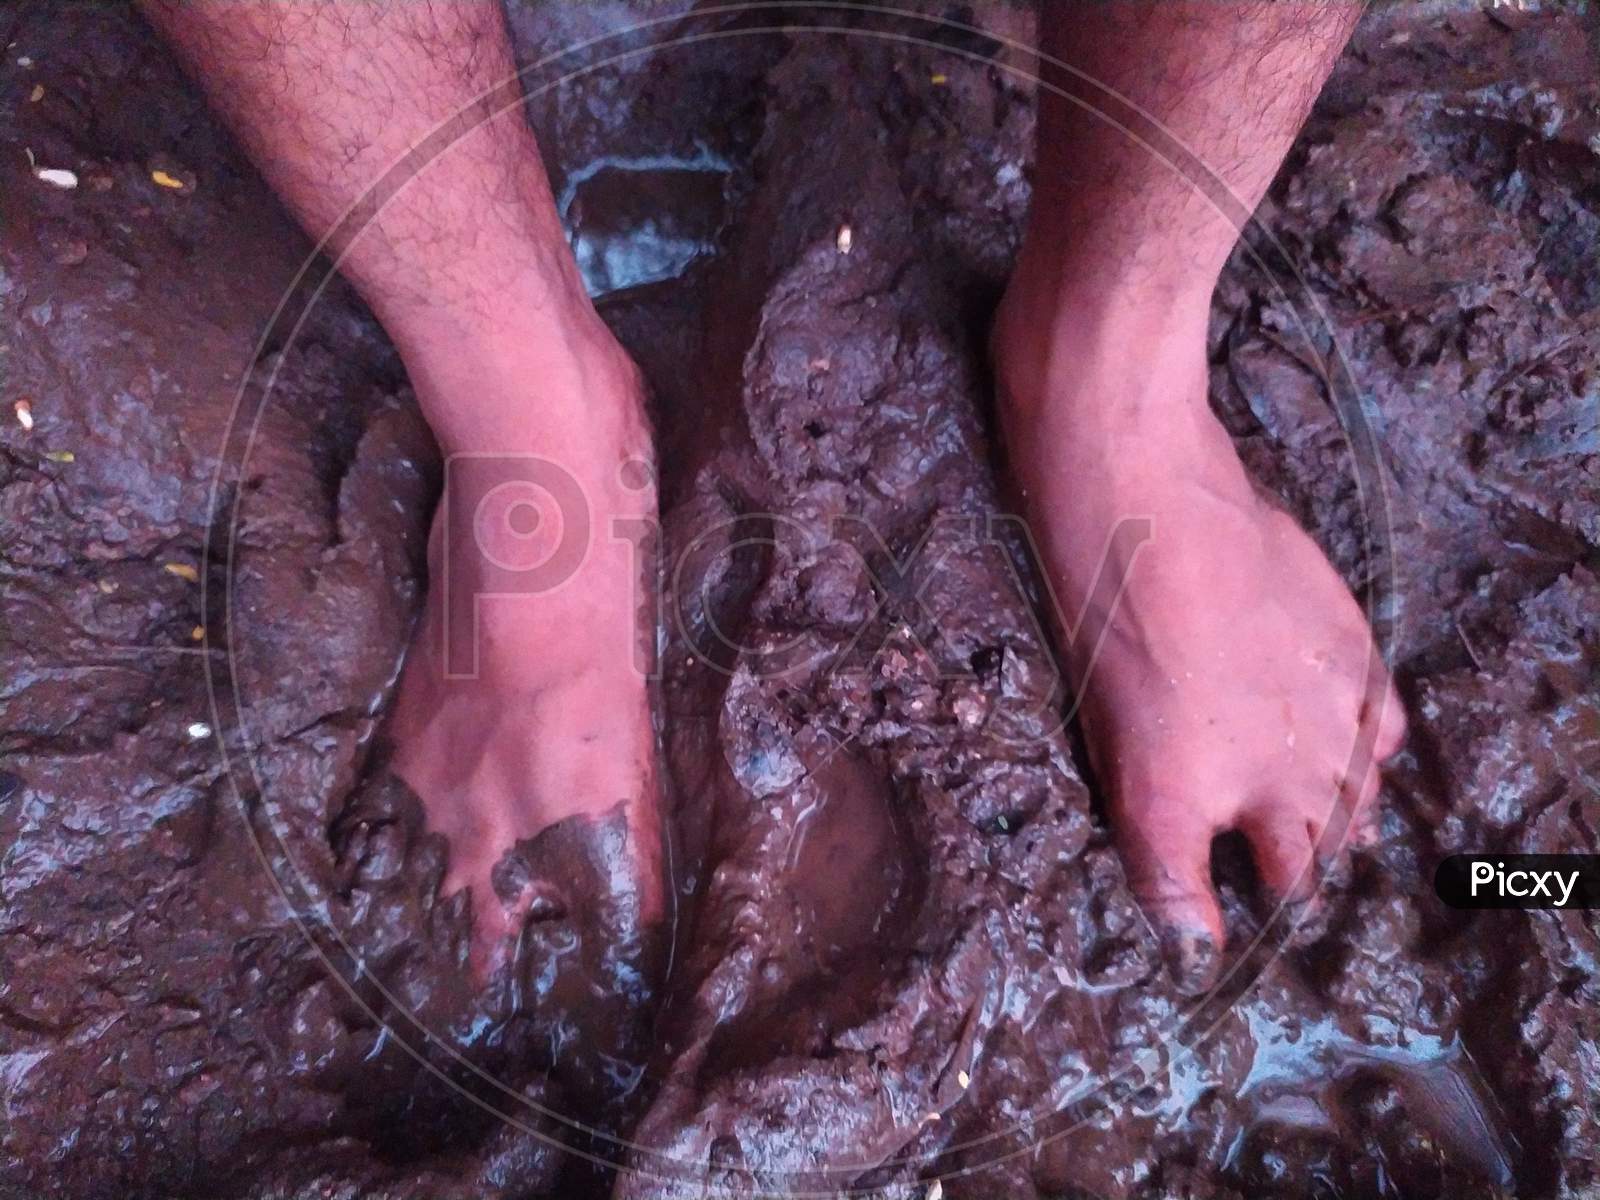 Dirty bare feets in mud